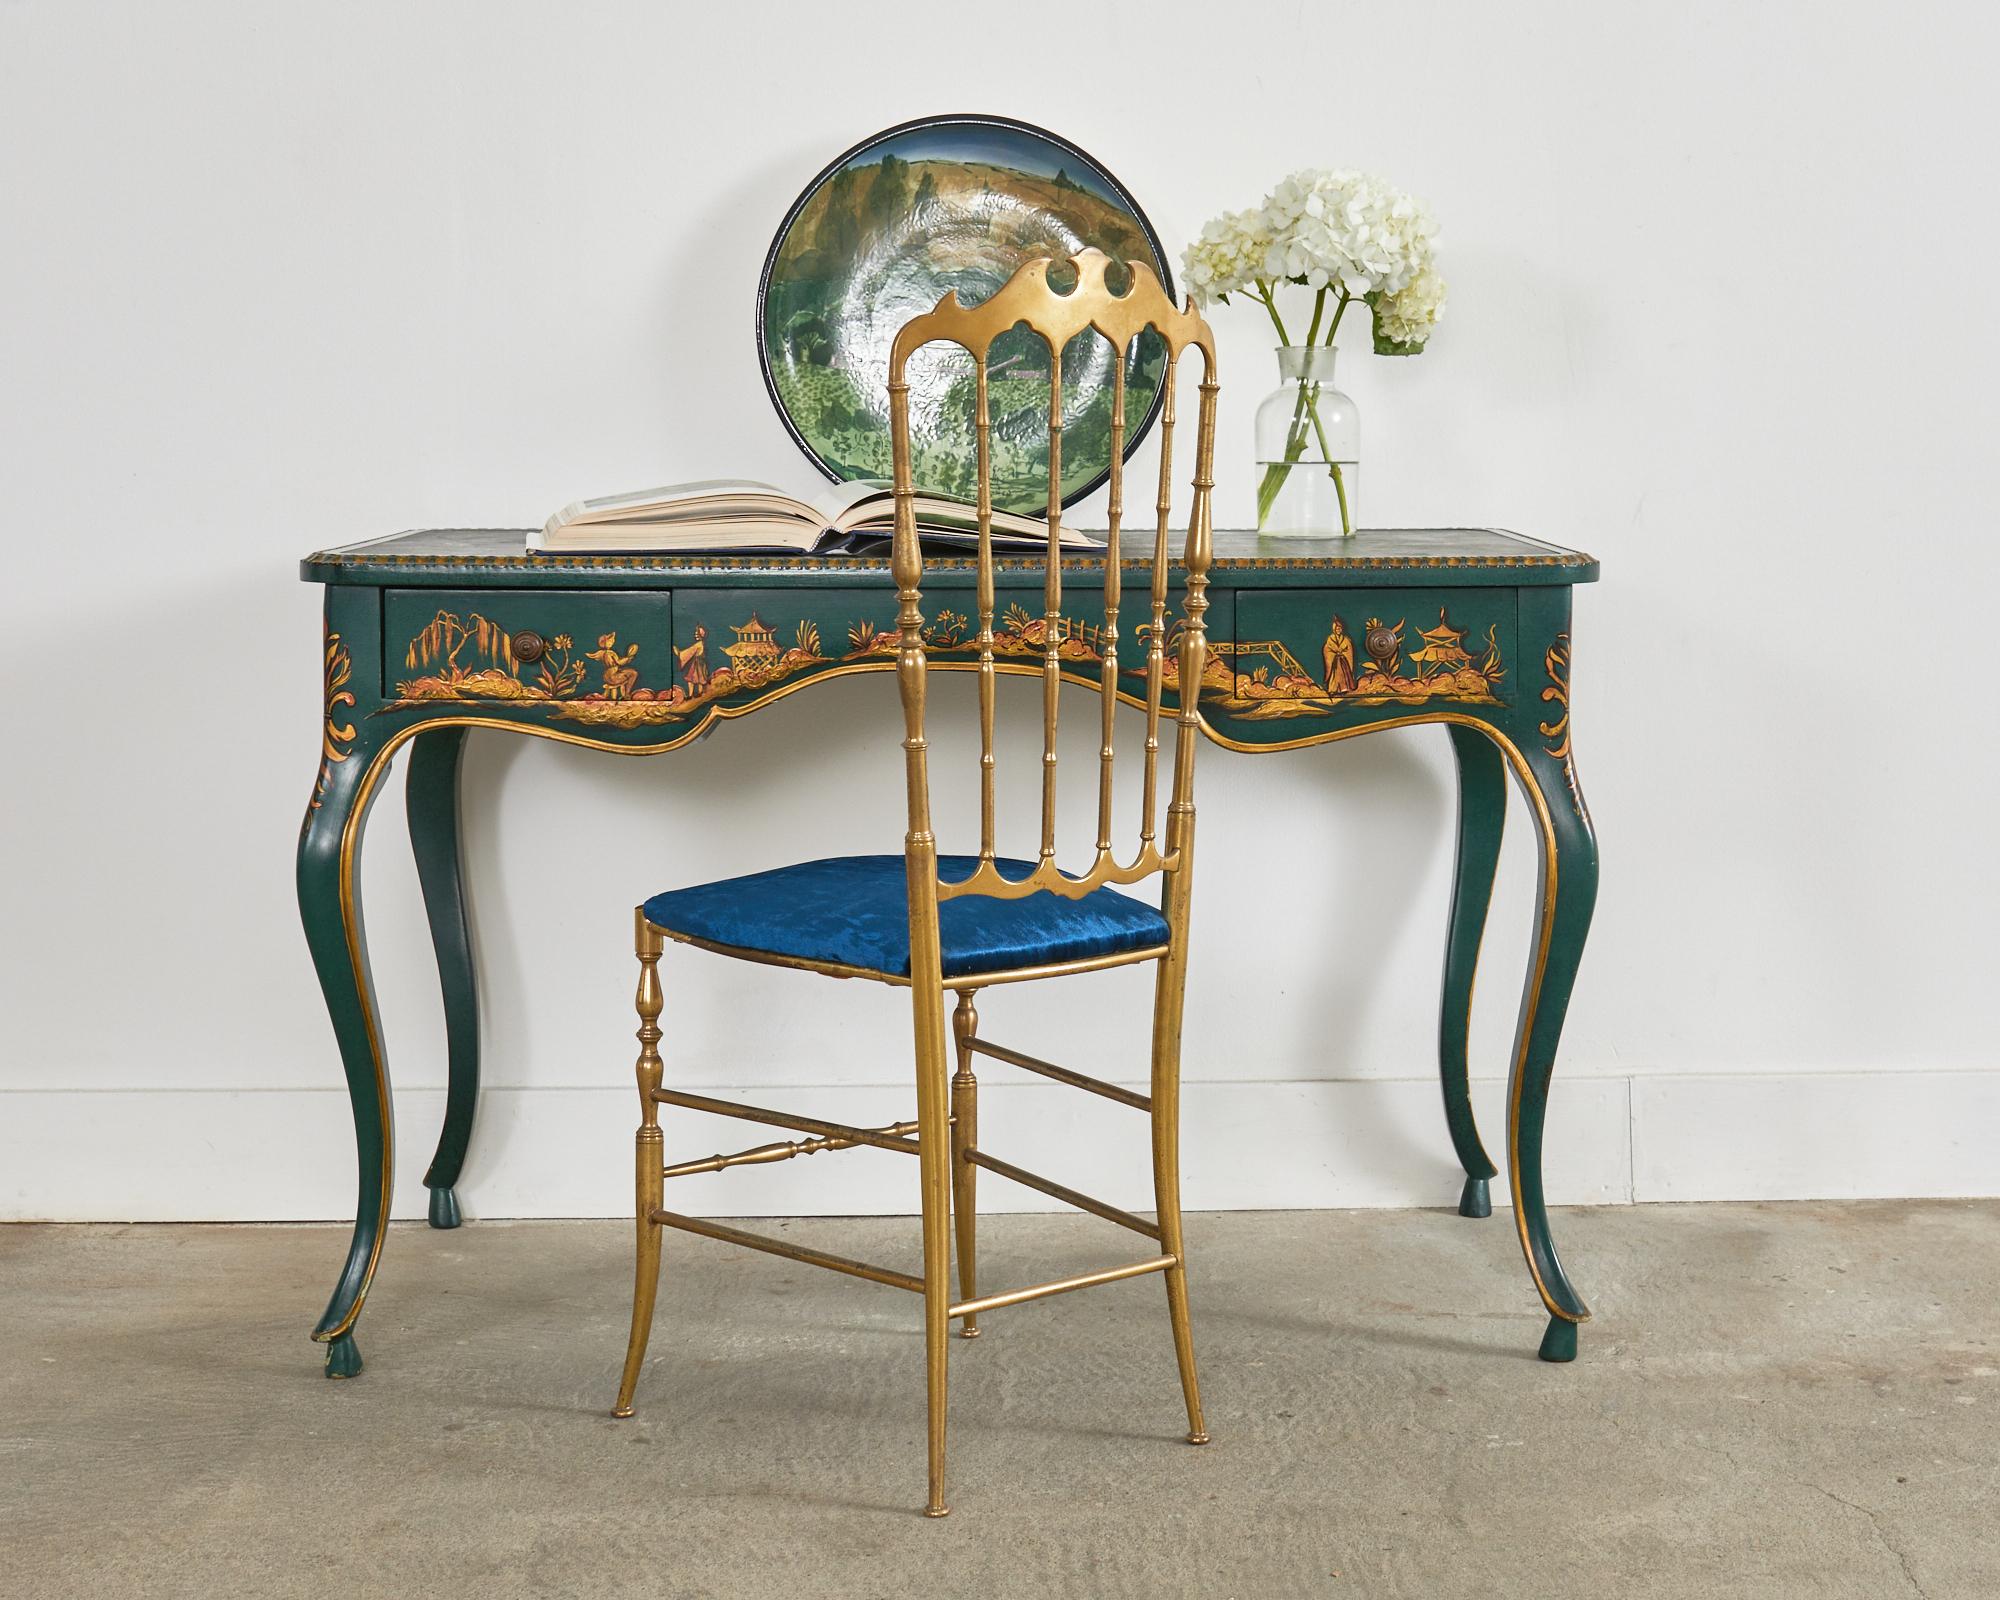 Gorgeous writing table desk or bureau plat made in the lovely Queen Anne style featuring an emerald green lacquered finish. Decorated in the chinoiserie revival taste with painted Asian reserves on the frieze. The desk is finished on all sides with